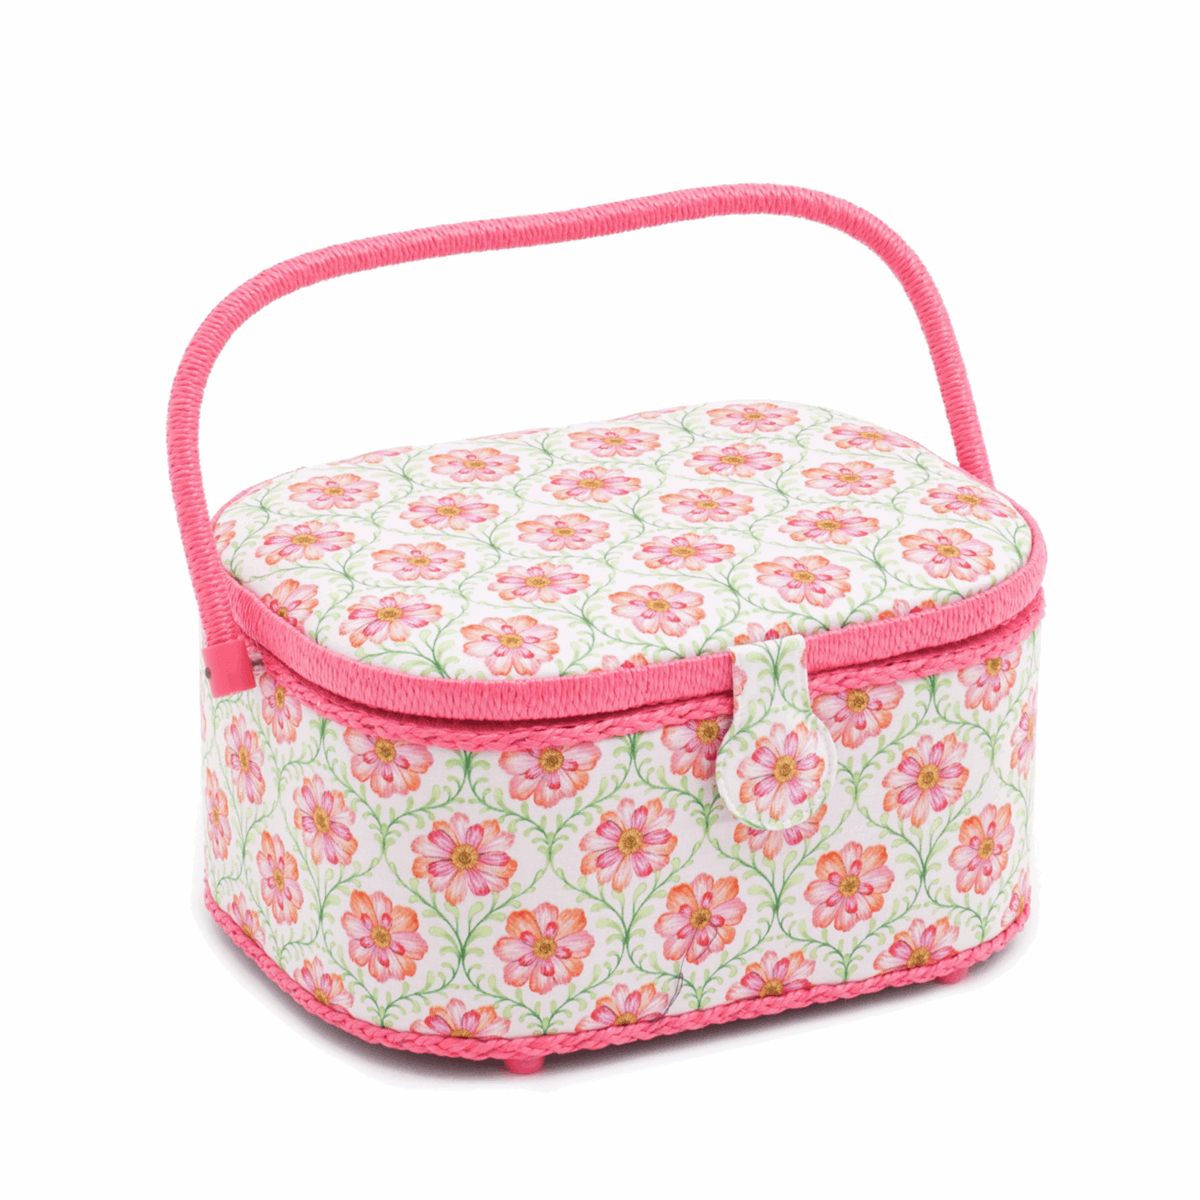 Blossoming Trellis Sewing Box - Large Oval